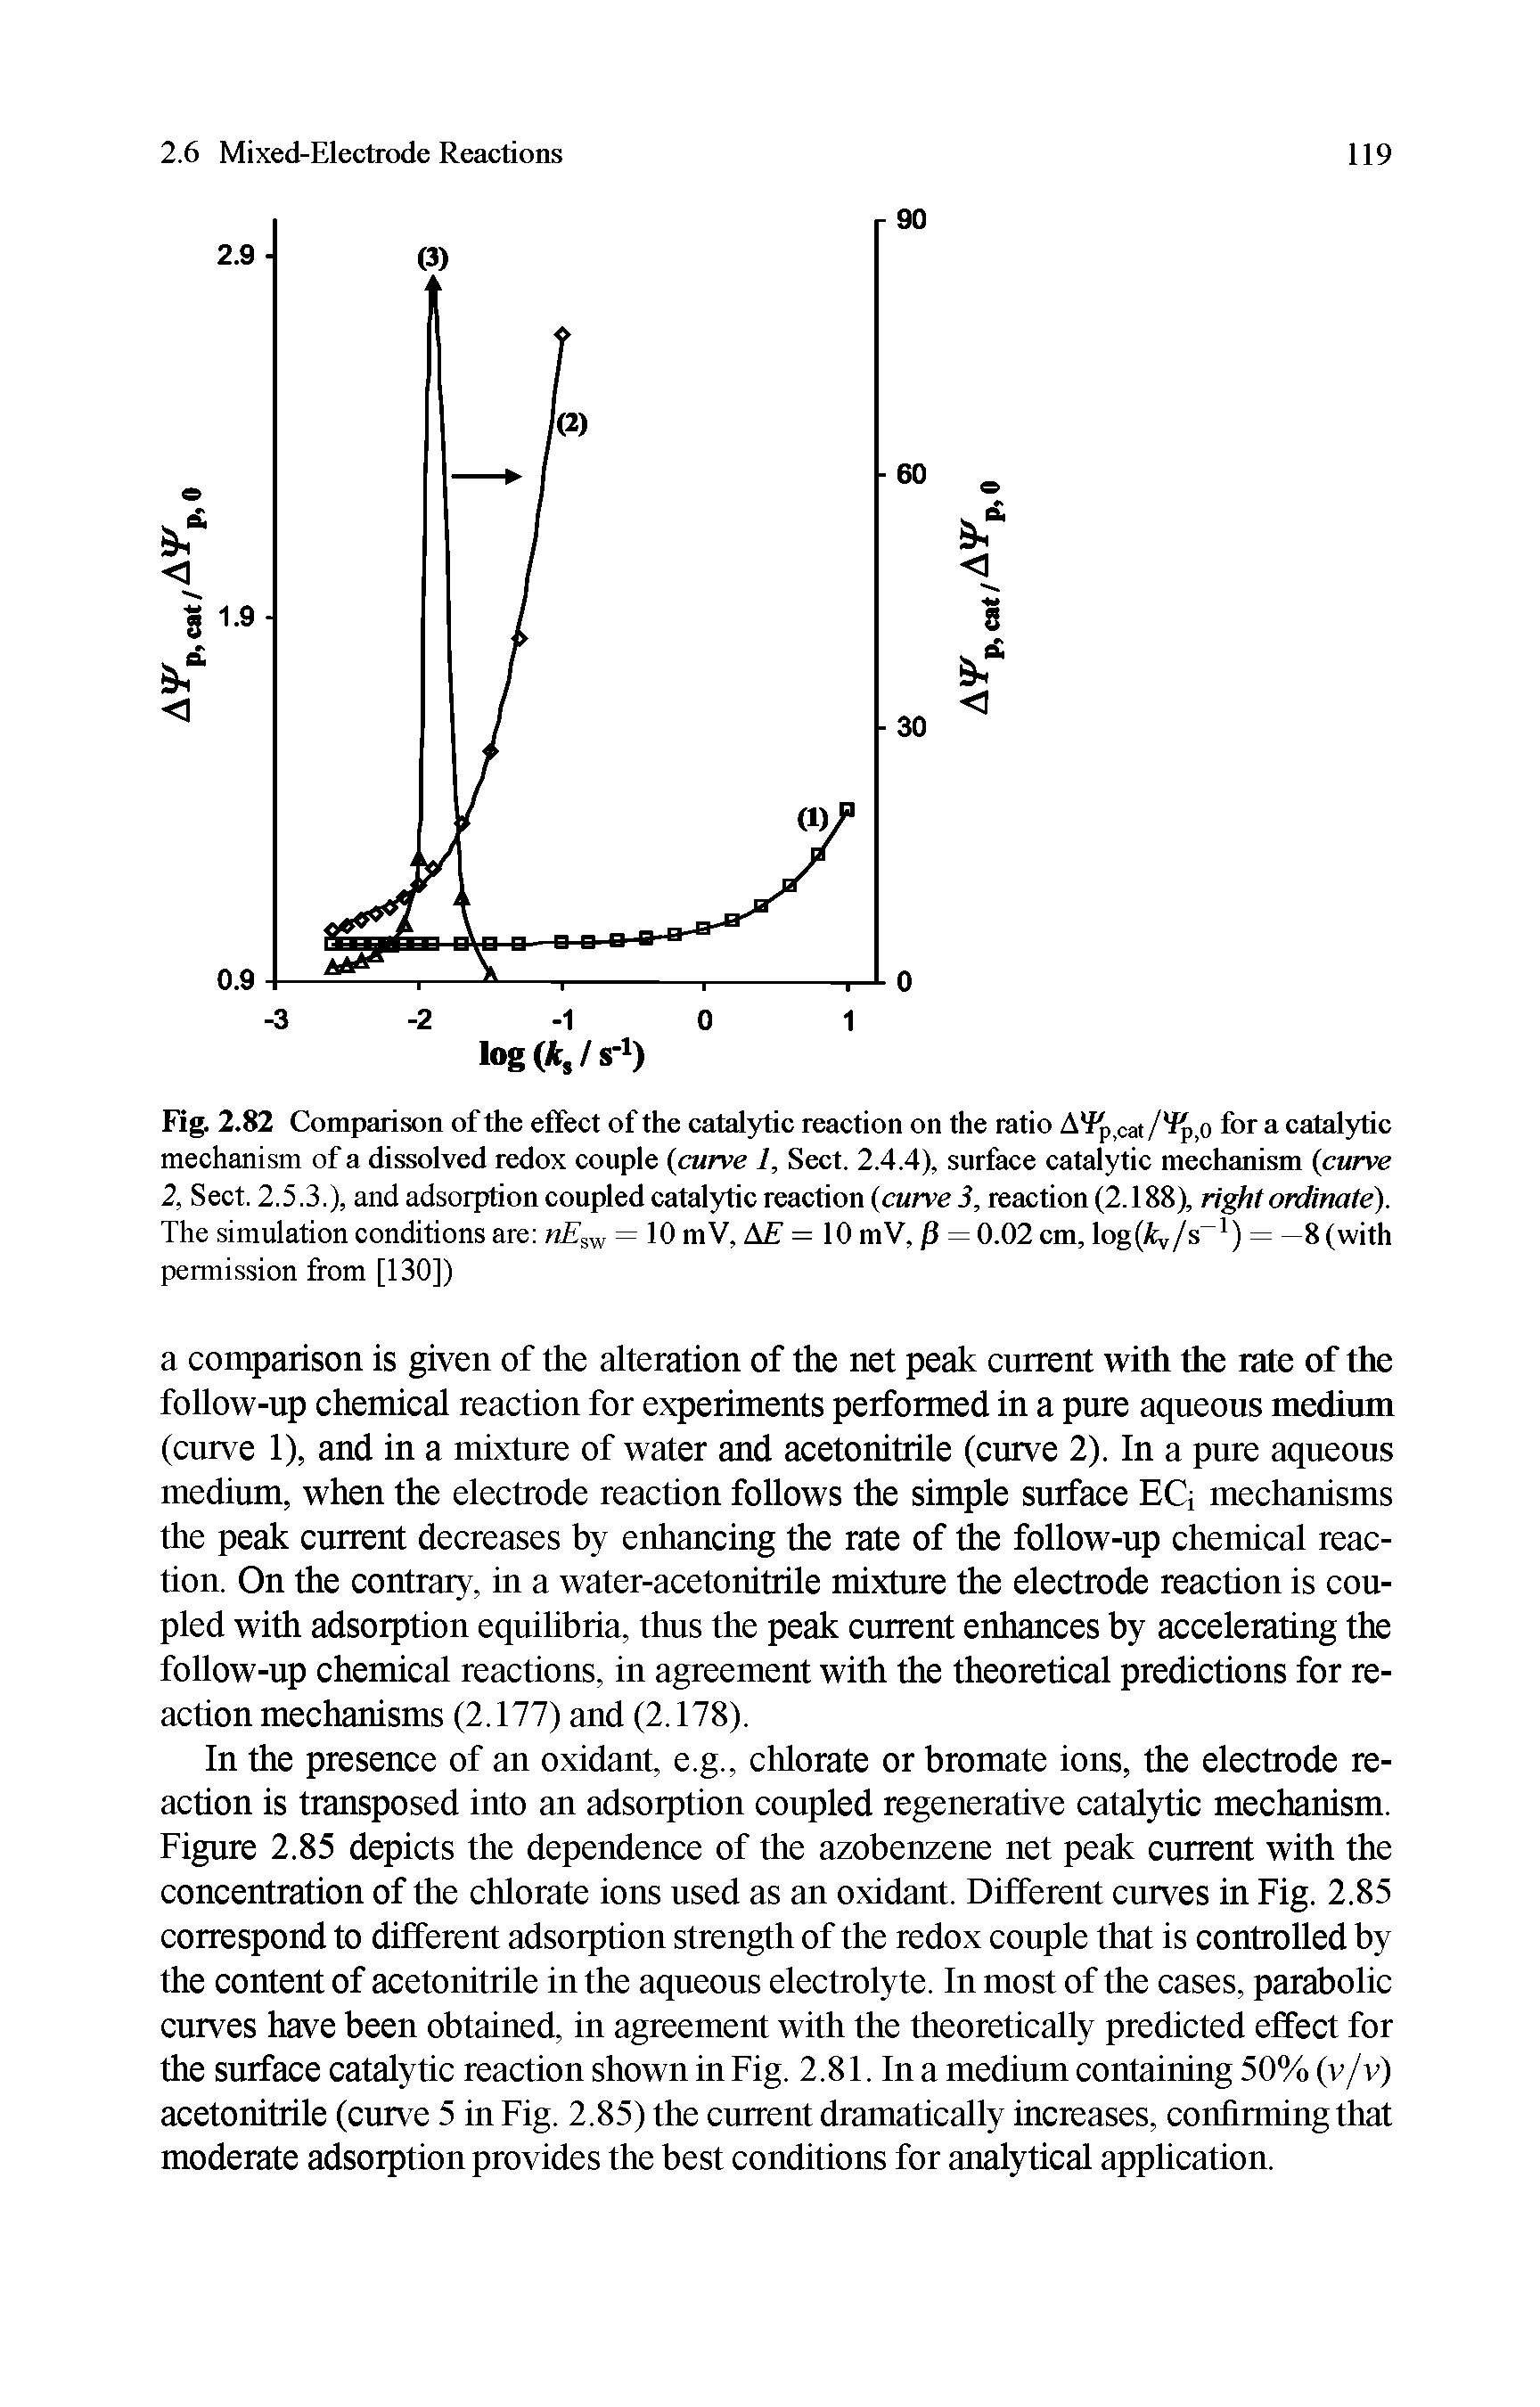 Fig. 2.82 Comparison of the effect of the catalytic reaction on the ratio A Pp cat/ ip.o for a catalytic mechanism of a dissolved redox couple curve 1, Sect. 2.4.4), surface catalytic mechanism curve 2, Sect. 2.5.3.), and adsorption coupled catalytic reaction curve 3, reaction (2.188), right ordinate). The simulation conditions are = 10 mV, AF = 10 mV, P = 0.02 cm, log(Av/s ) = —8 (with...